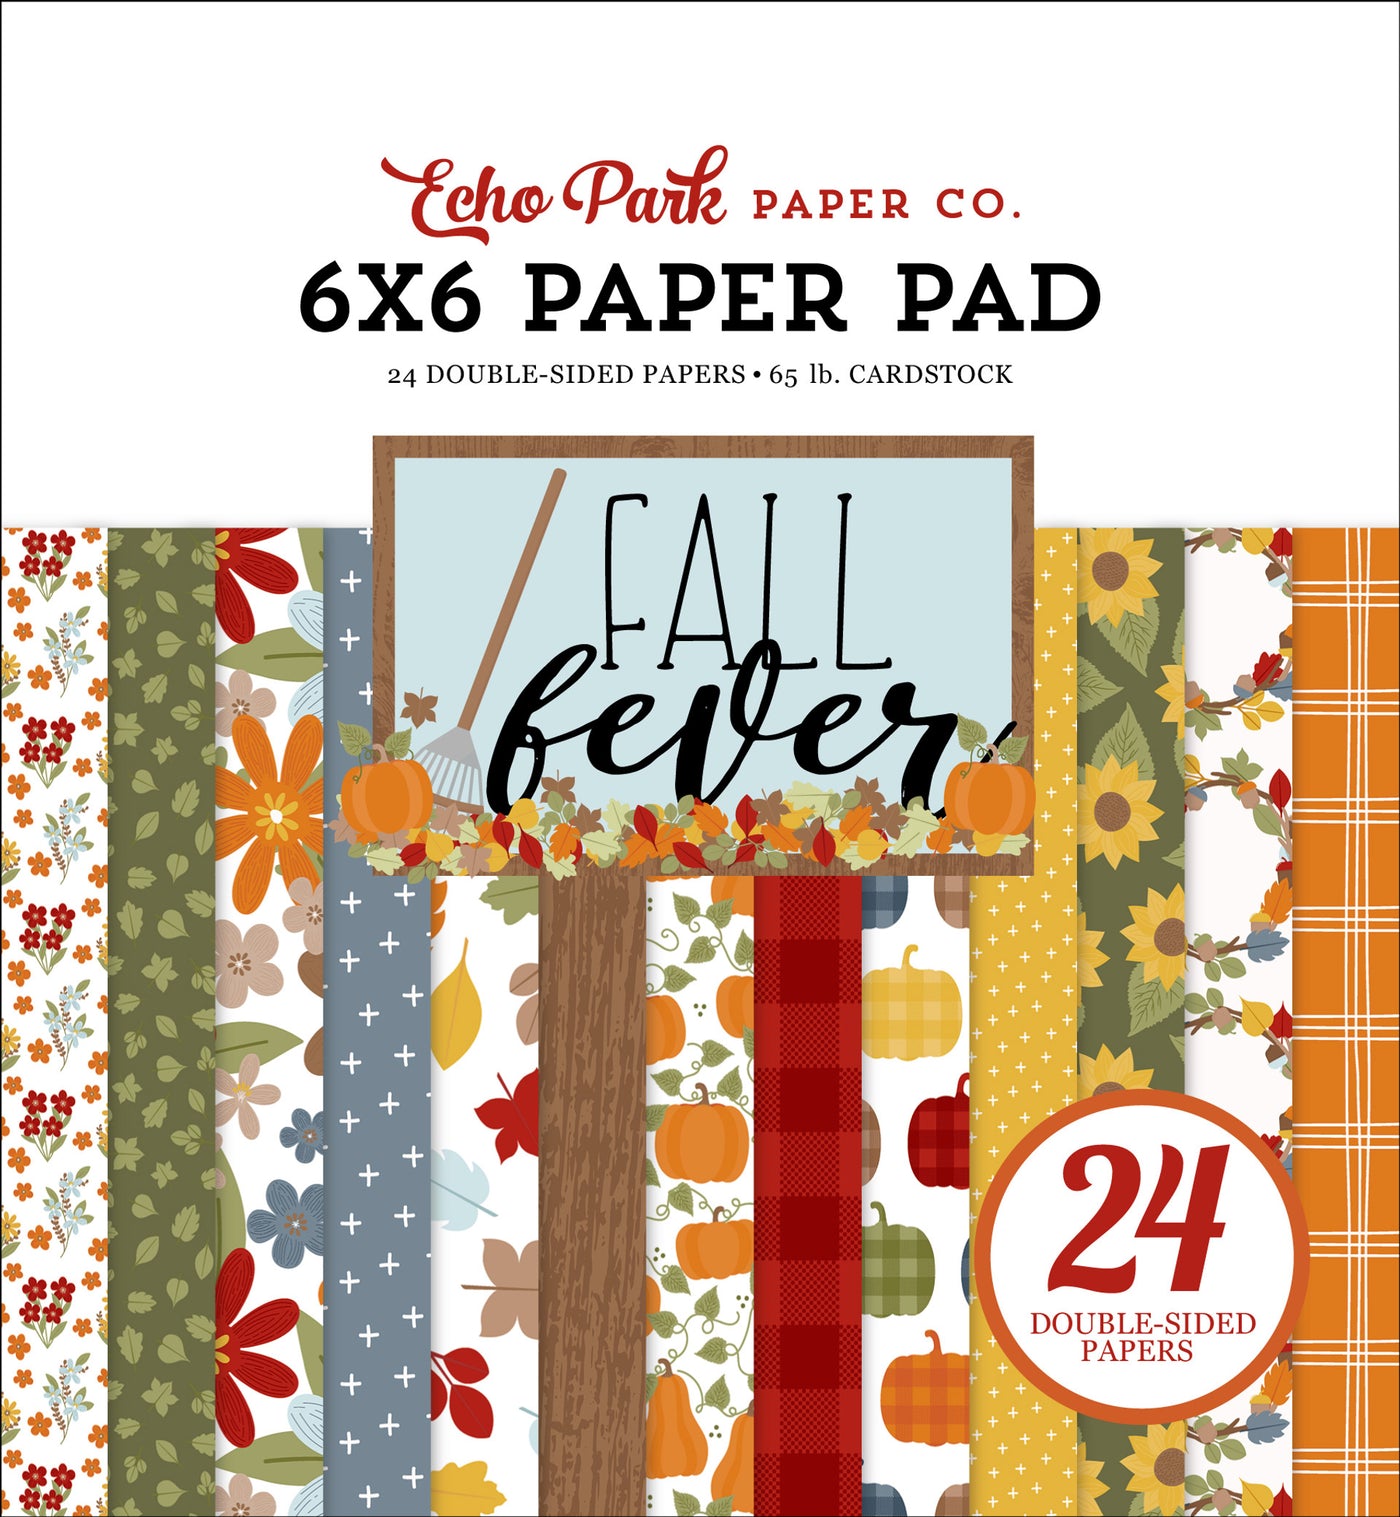 24 double-sided pages with patterns and themes for the autumn season. 6x6 pad is convenient to use for card making and papercrafts—archival quality.